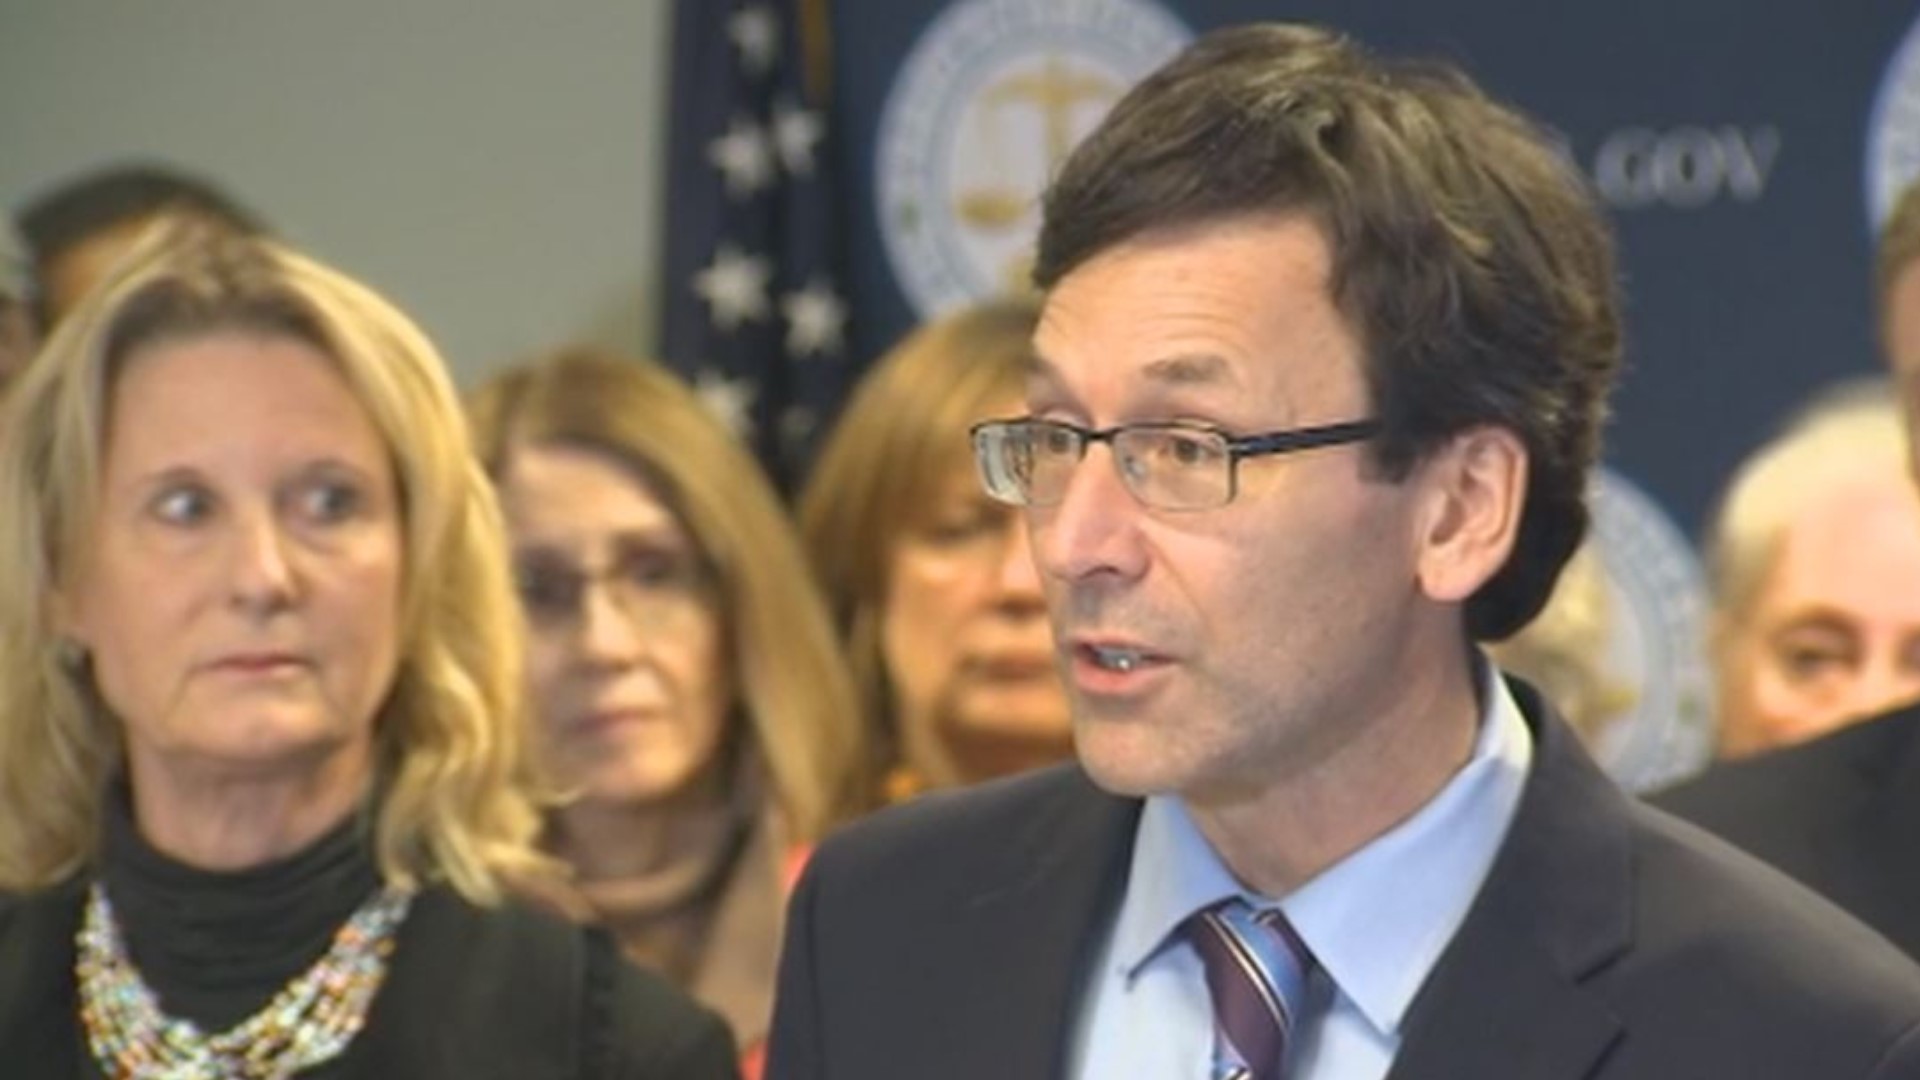 Attorney General Bob Ferguson is proposing three bills that seek to limit high-capacity magazines, ban assault weapons, and strengthen rules on ammunition sales.